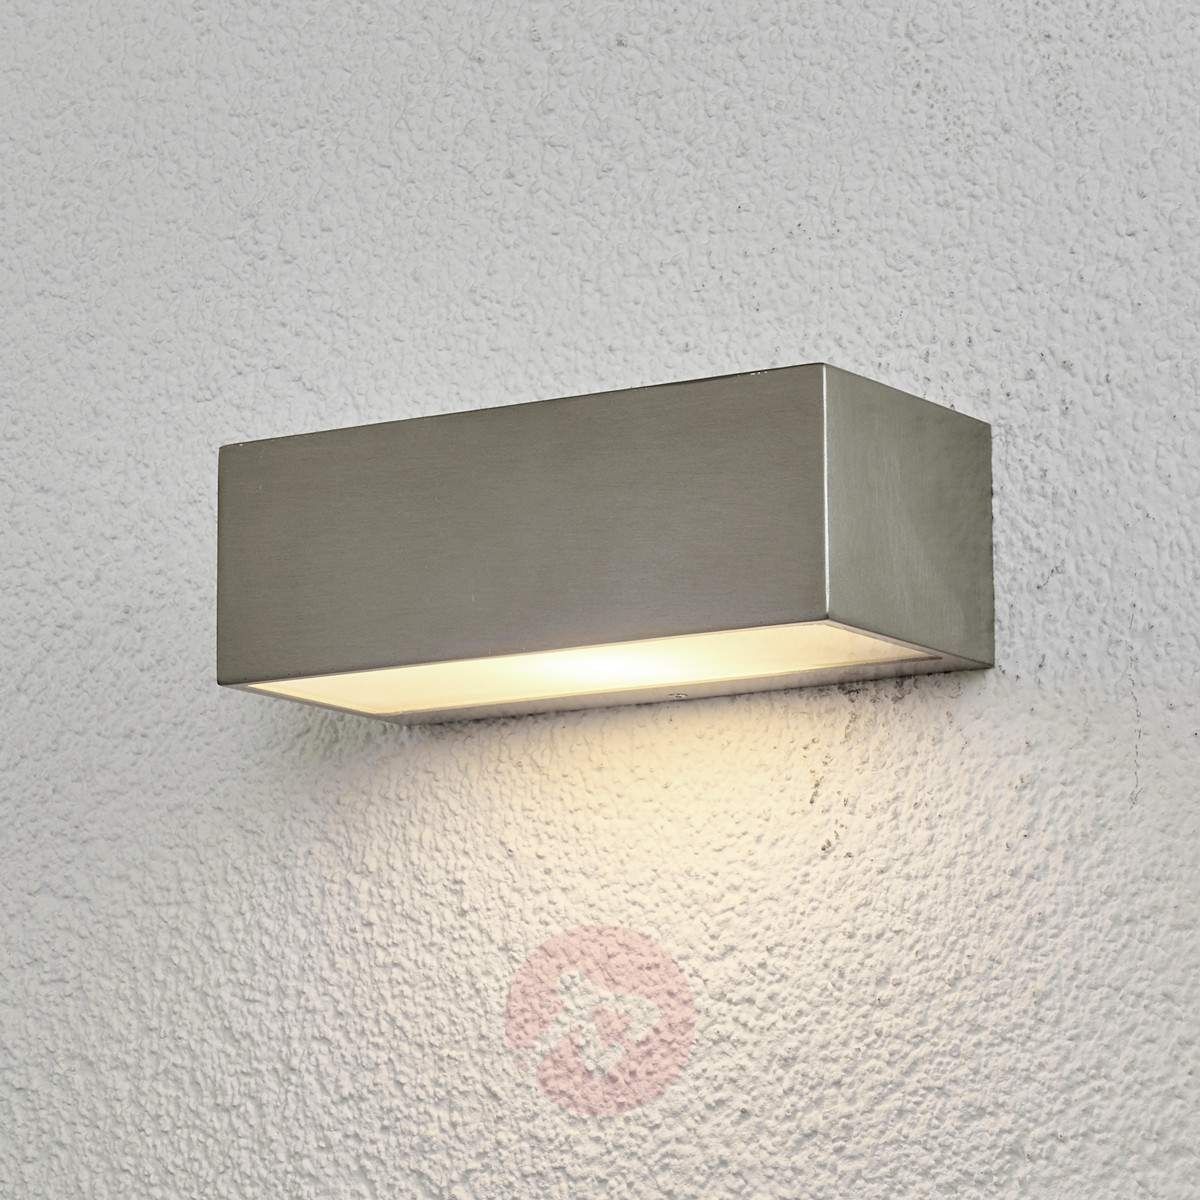 Stainless Steel Outdoor Wall Light Leonora | Lights.co (View 6 of 15)